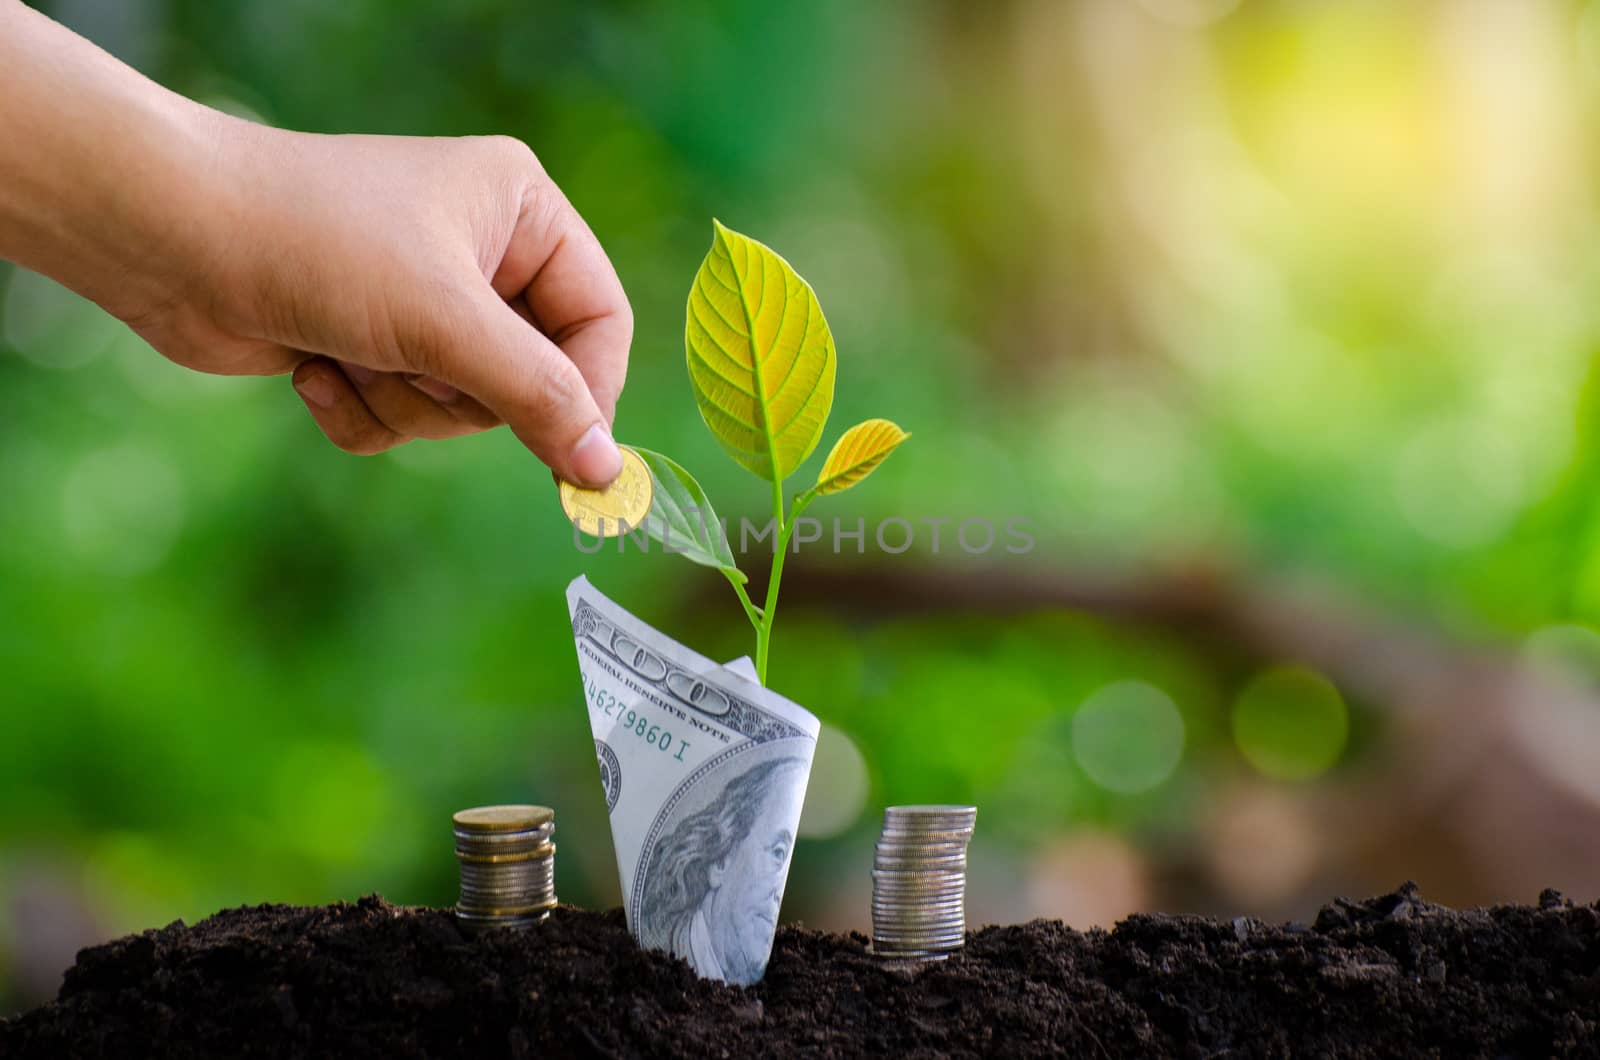 hand Put money Bottle Banknotes tree Image of bank note with plant growing on top for business green natural background money saving and investment financial concept